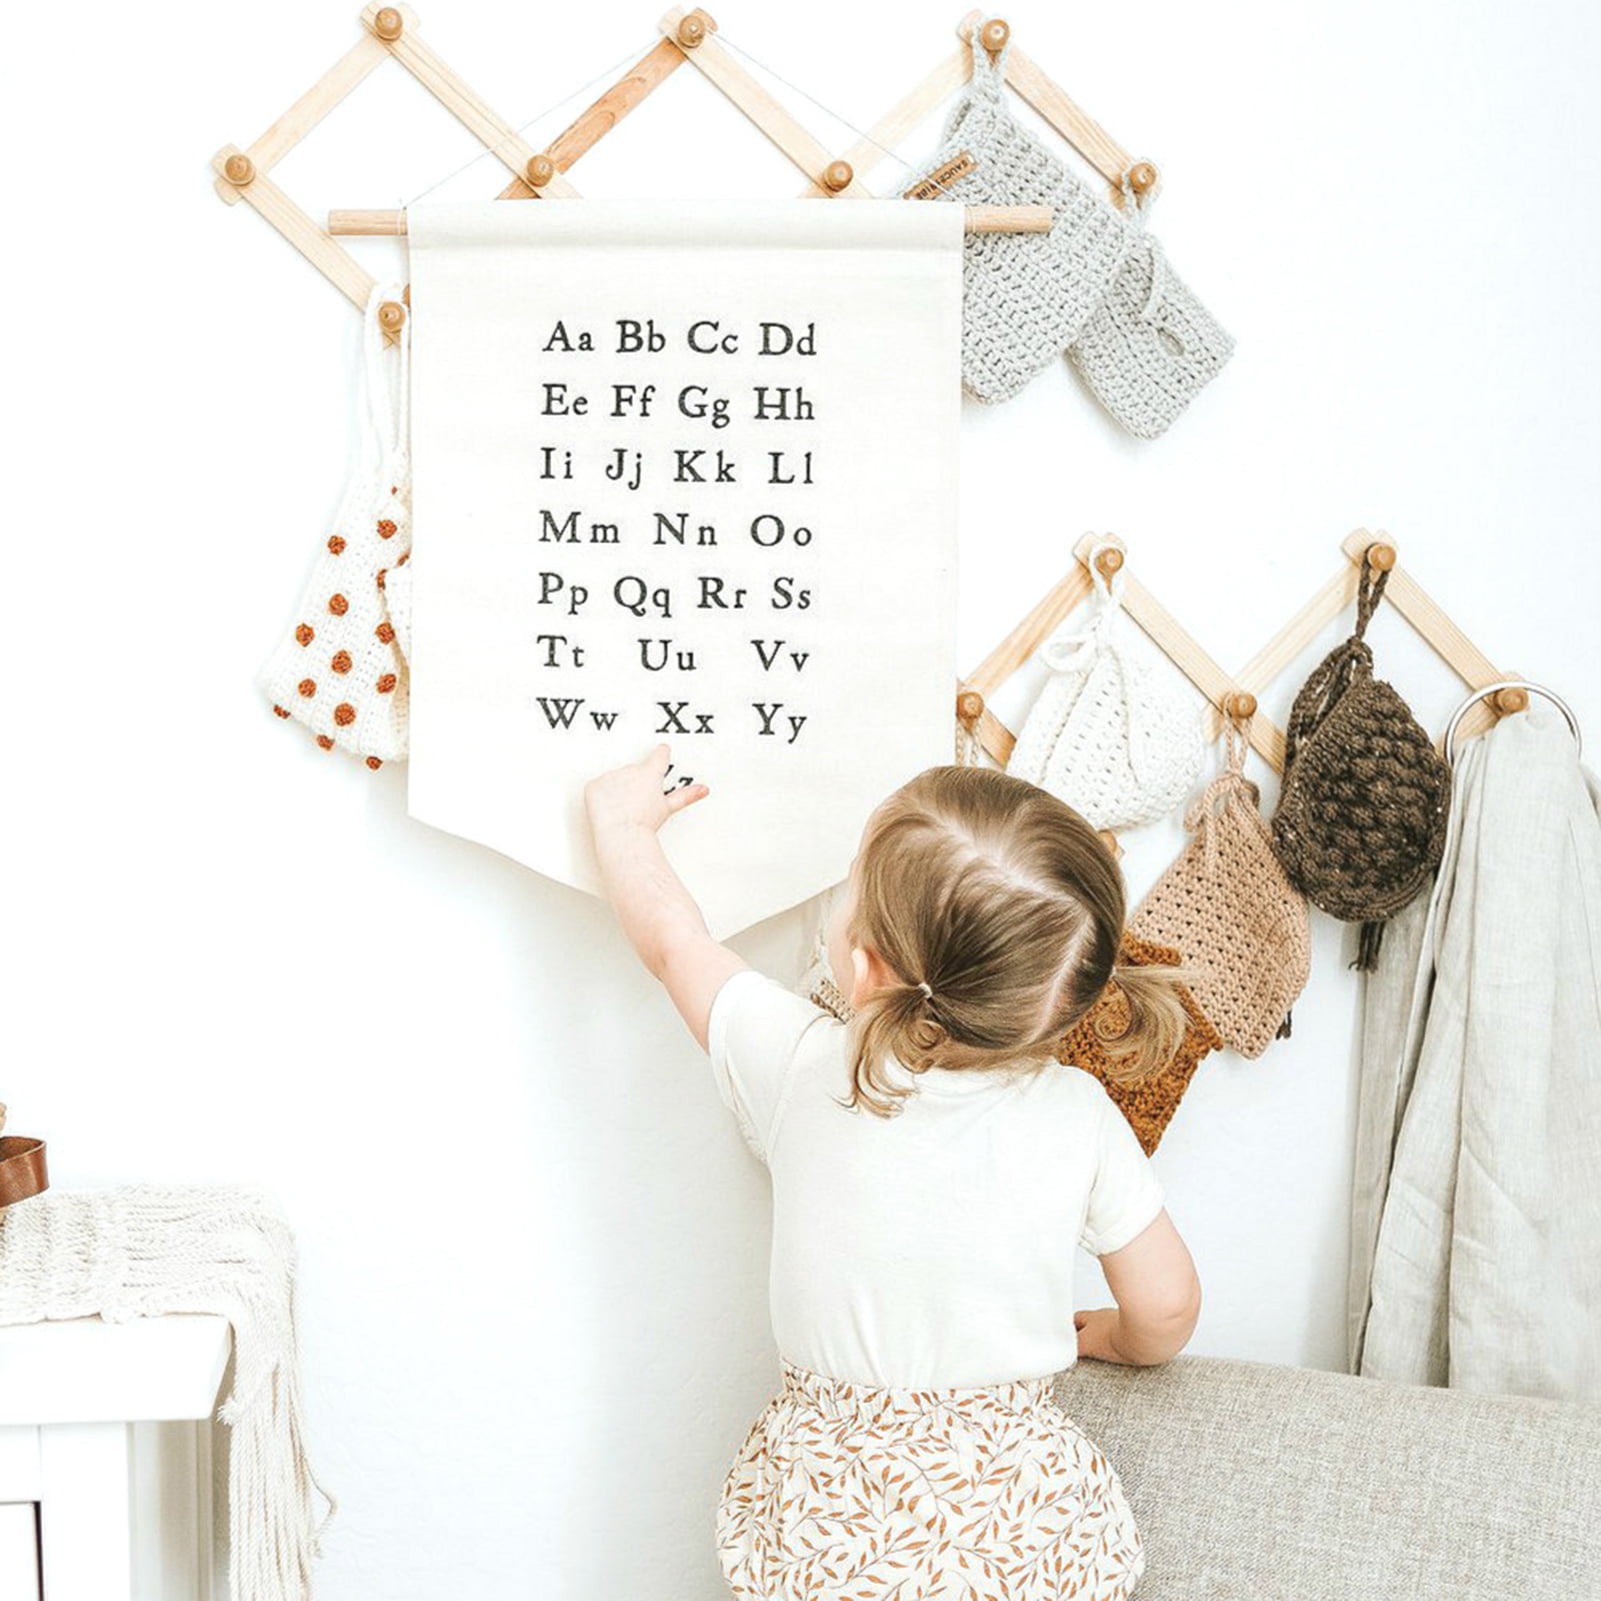 Baby Boy Teen and Kids Room Letter Cotton Alphabet Wall Hanging Decoration for Baby Girl Nursery Wall Canvas Banners Home Decorative Plaque 